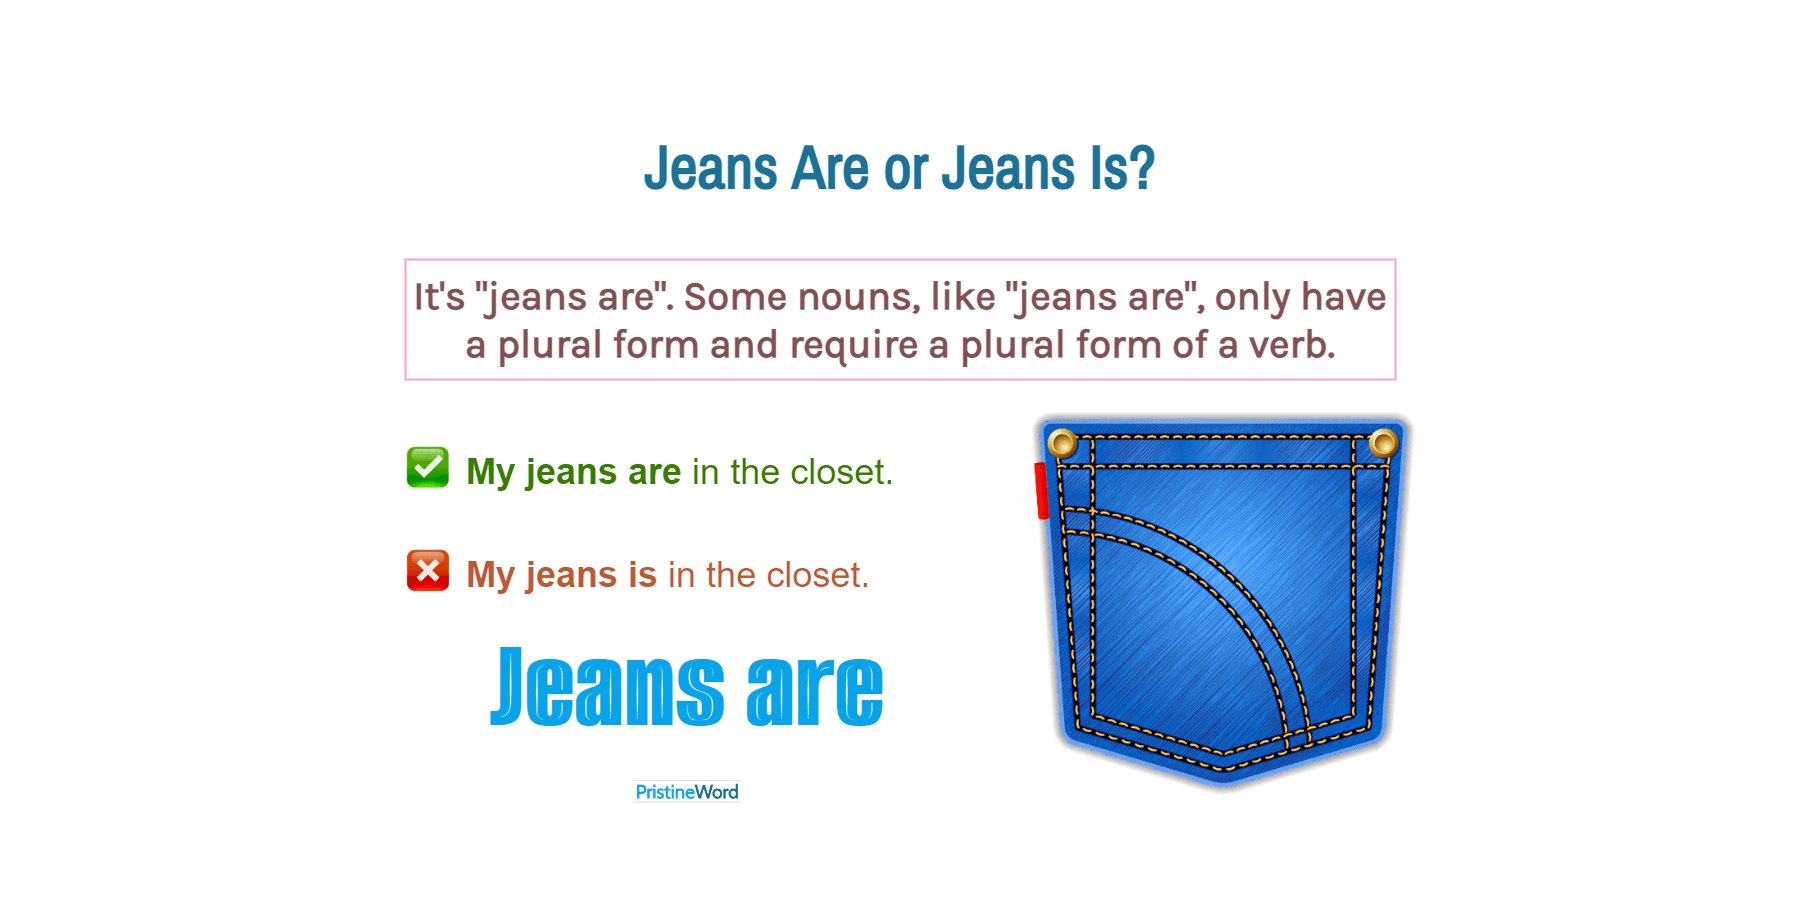 Are Jeans Which Is Correct?